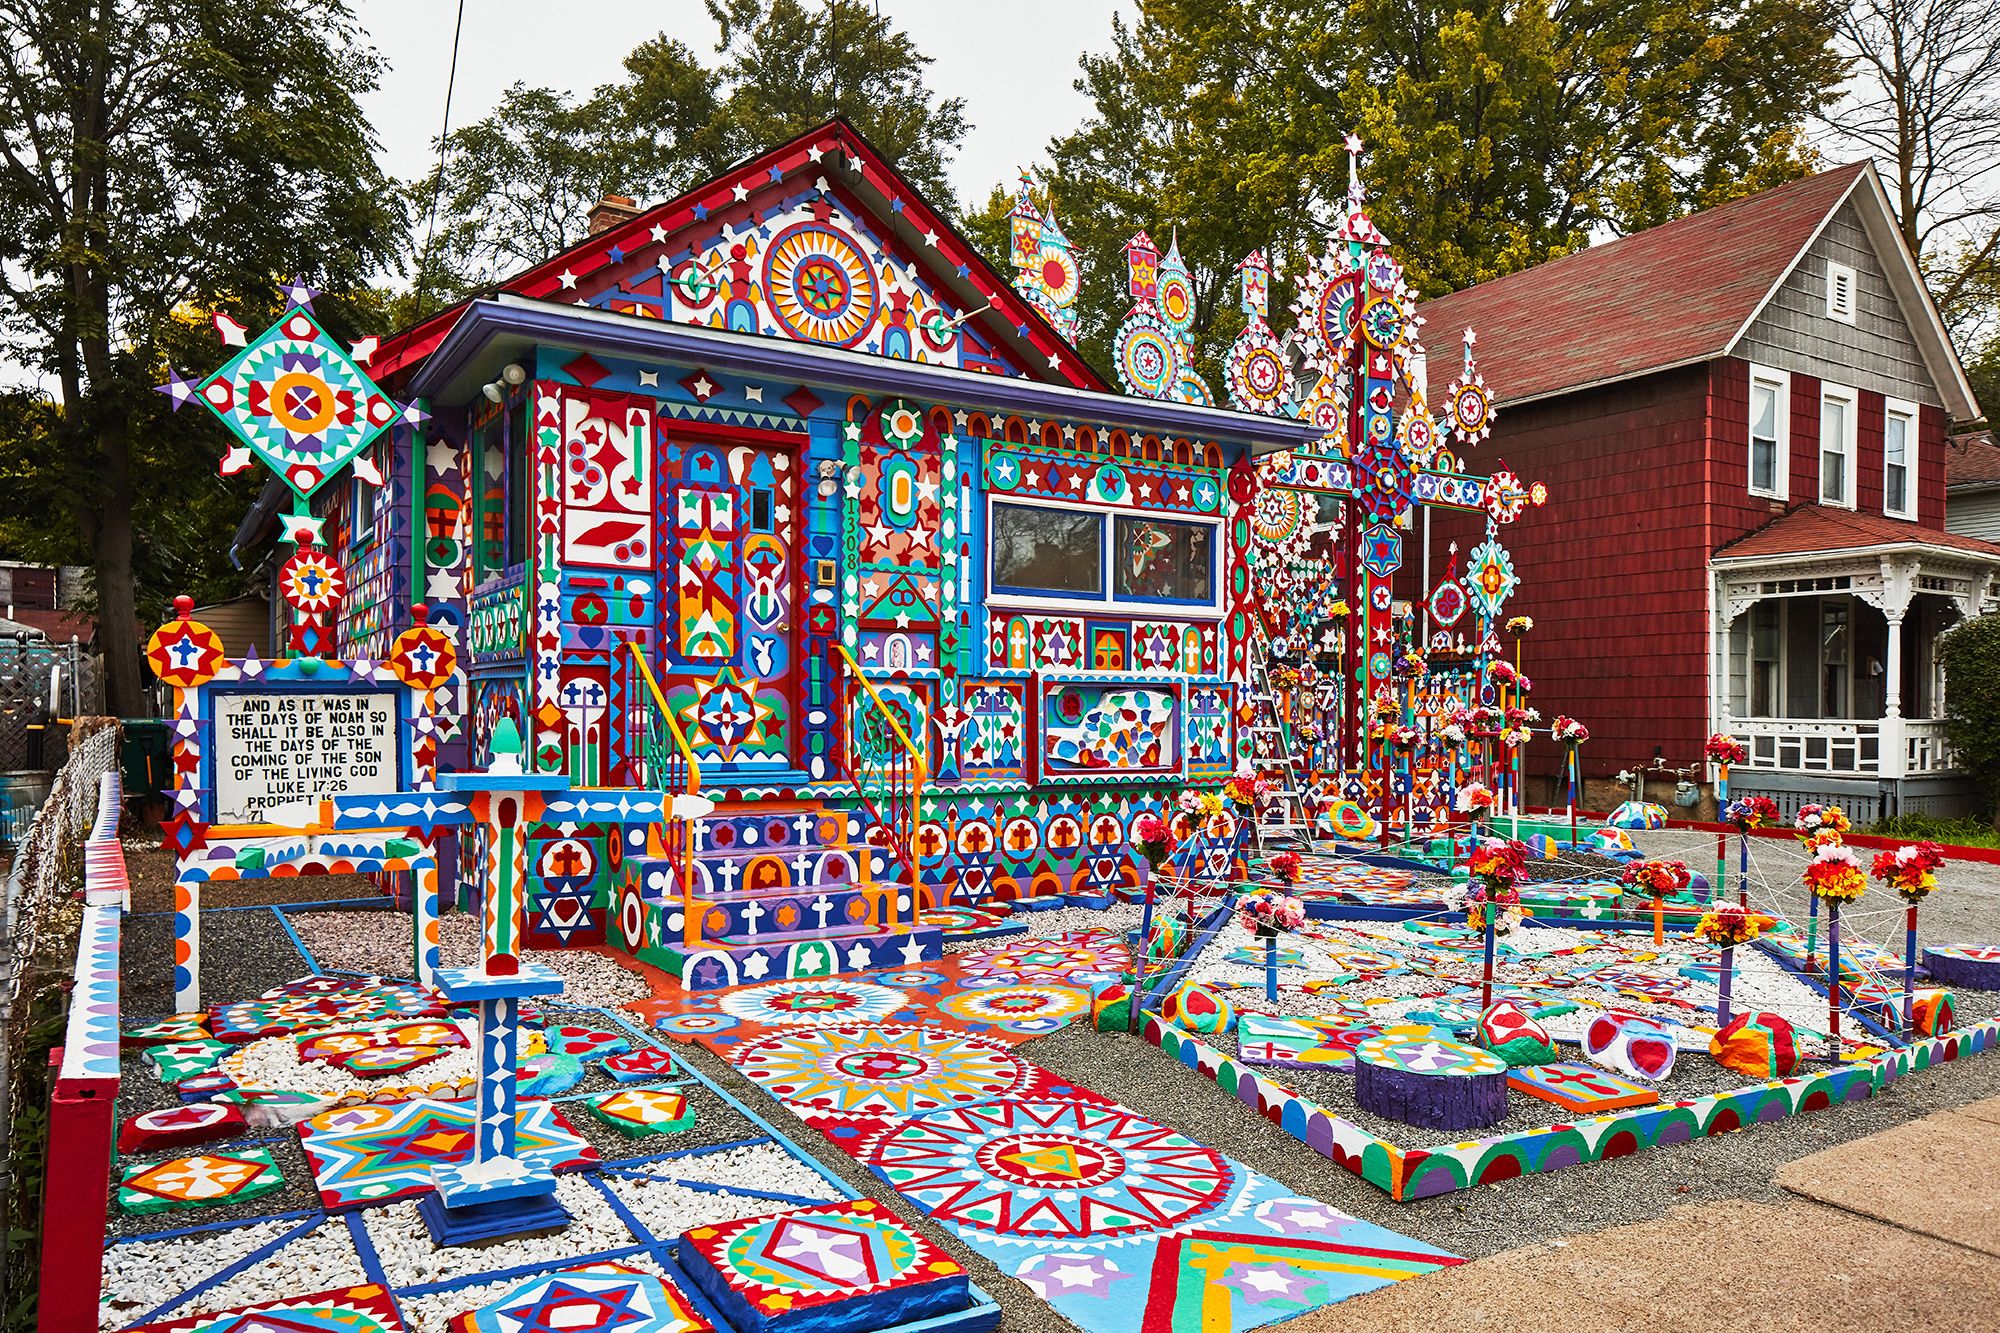 Isaiah Robertson's "Second Coming House" — covered in ornate, kaleidoscopic assemblages —  is to open to the public in Niagara Falls, New York as an art destination and community gathering space.